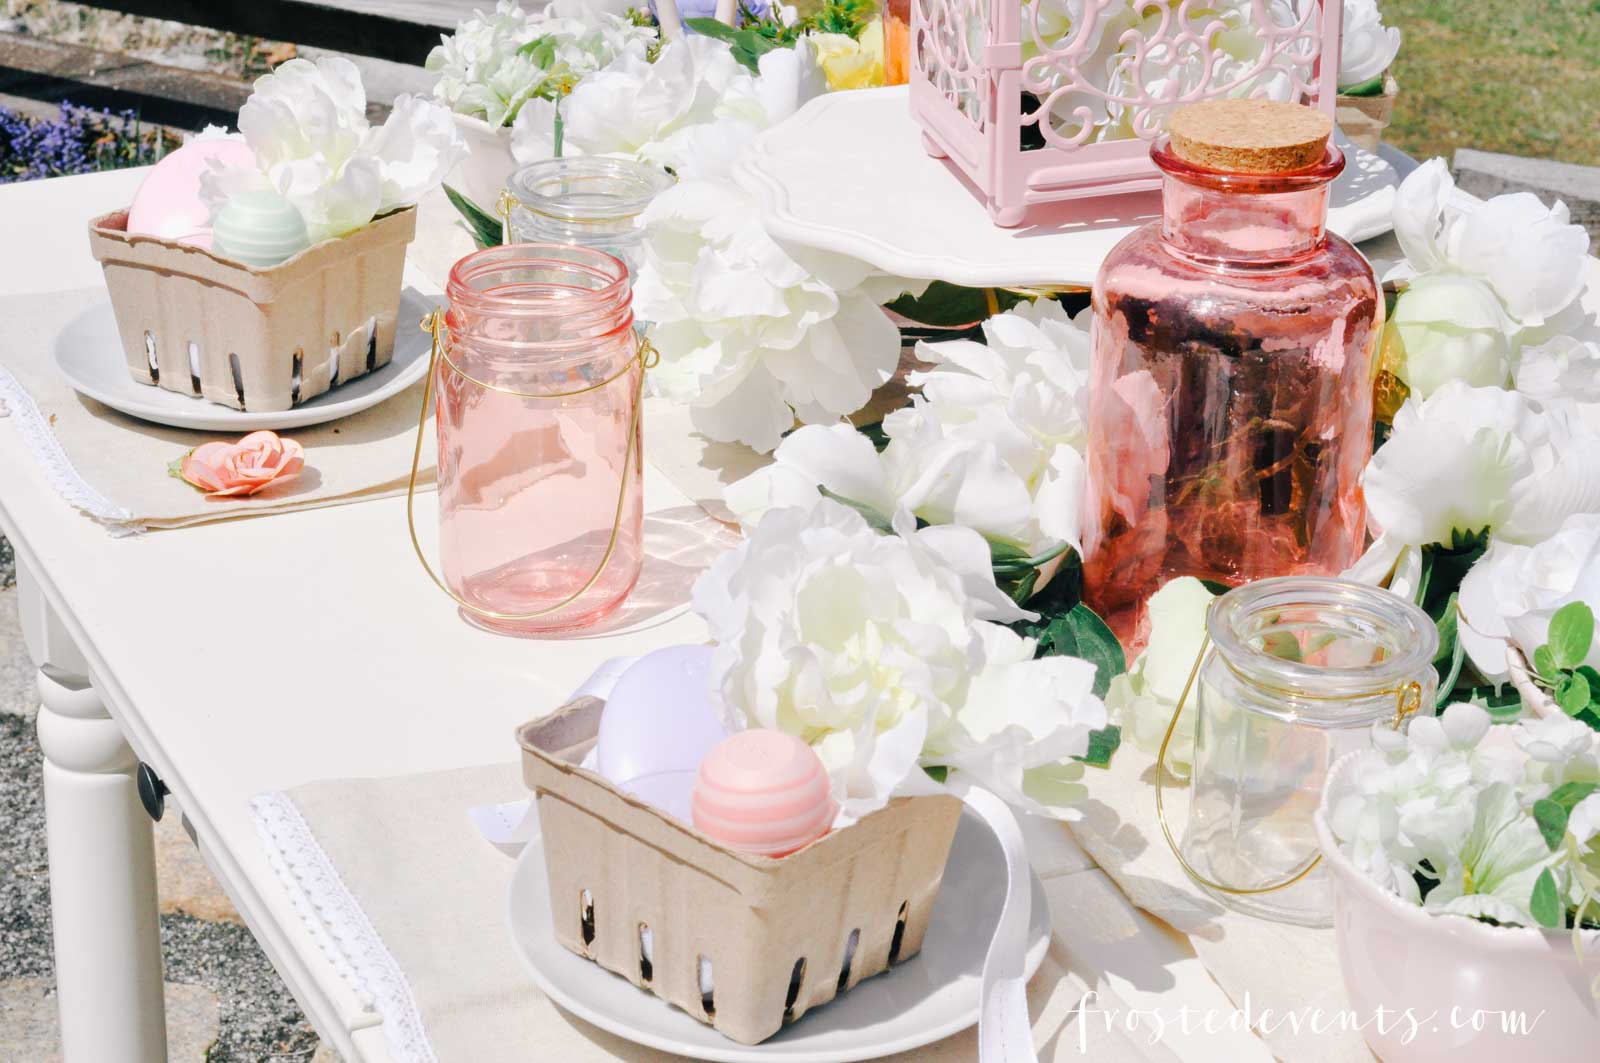 Mother's Day Gift Ideas + Pretty Floral Party Tablescape via Misty Nelson @frostedevents frostedmoms.com 